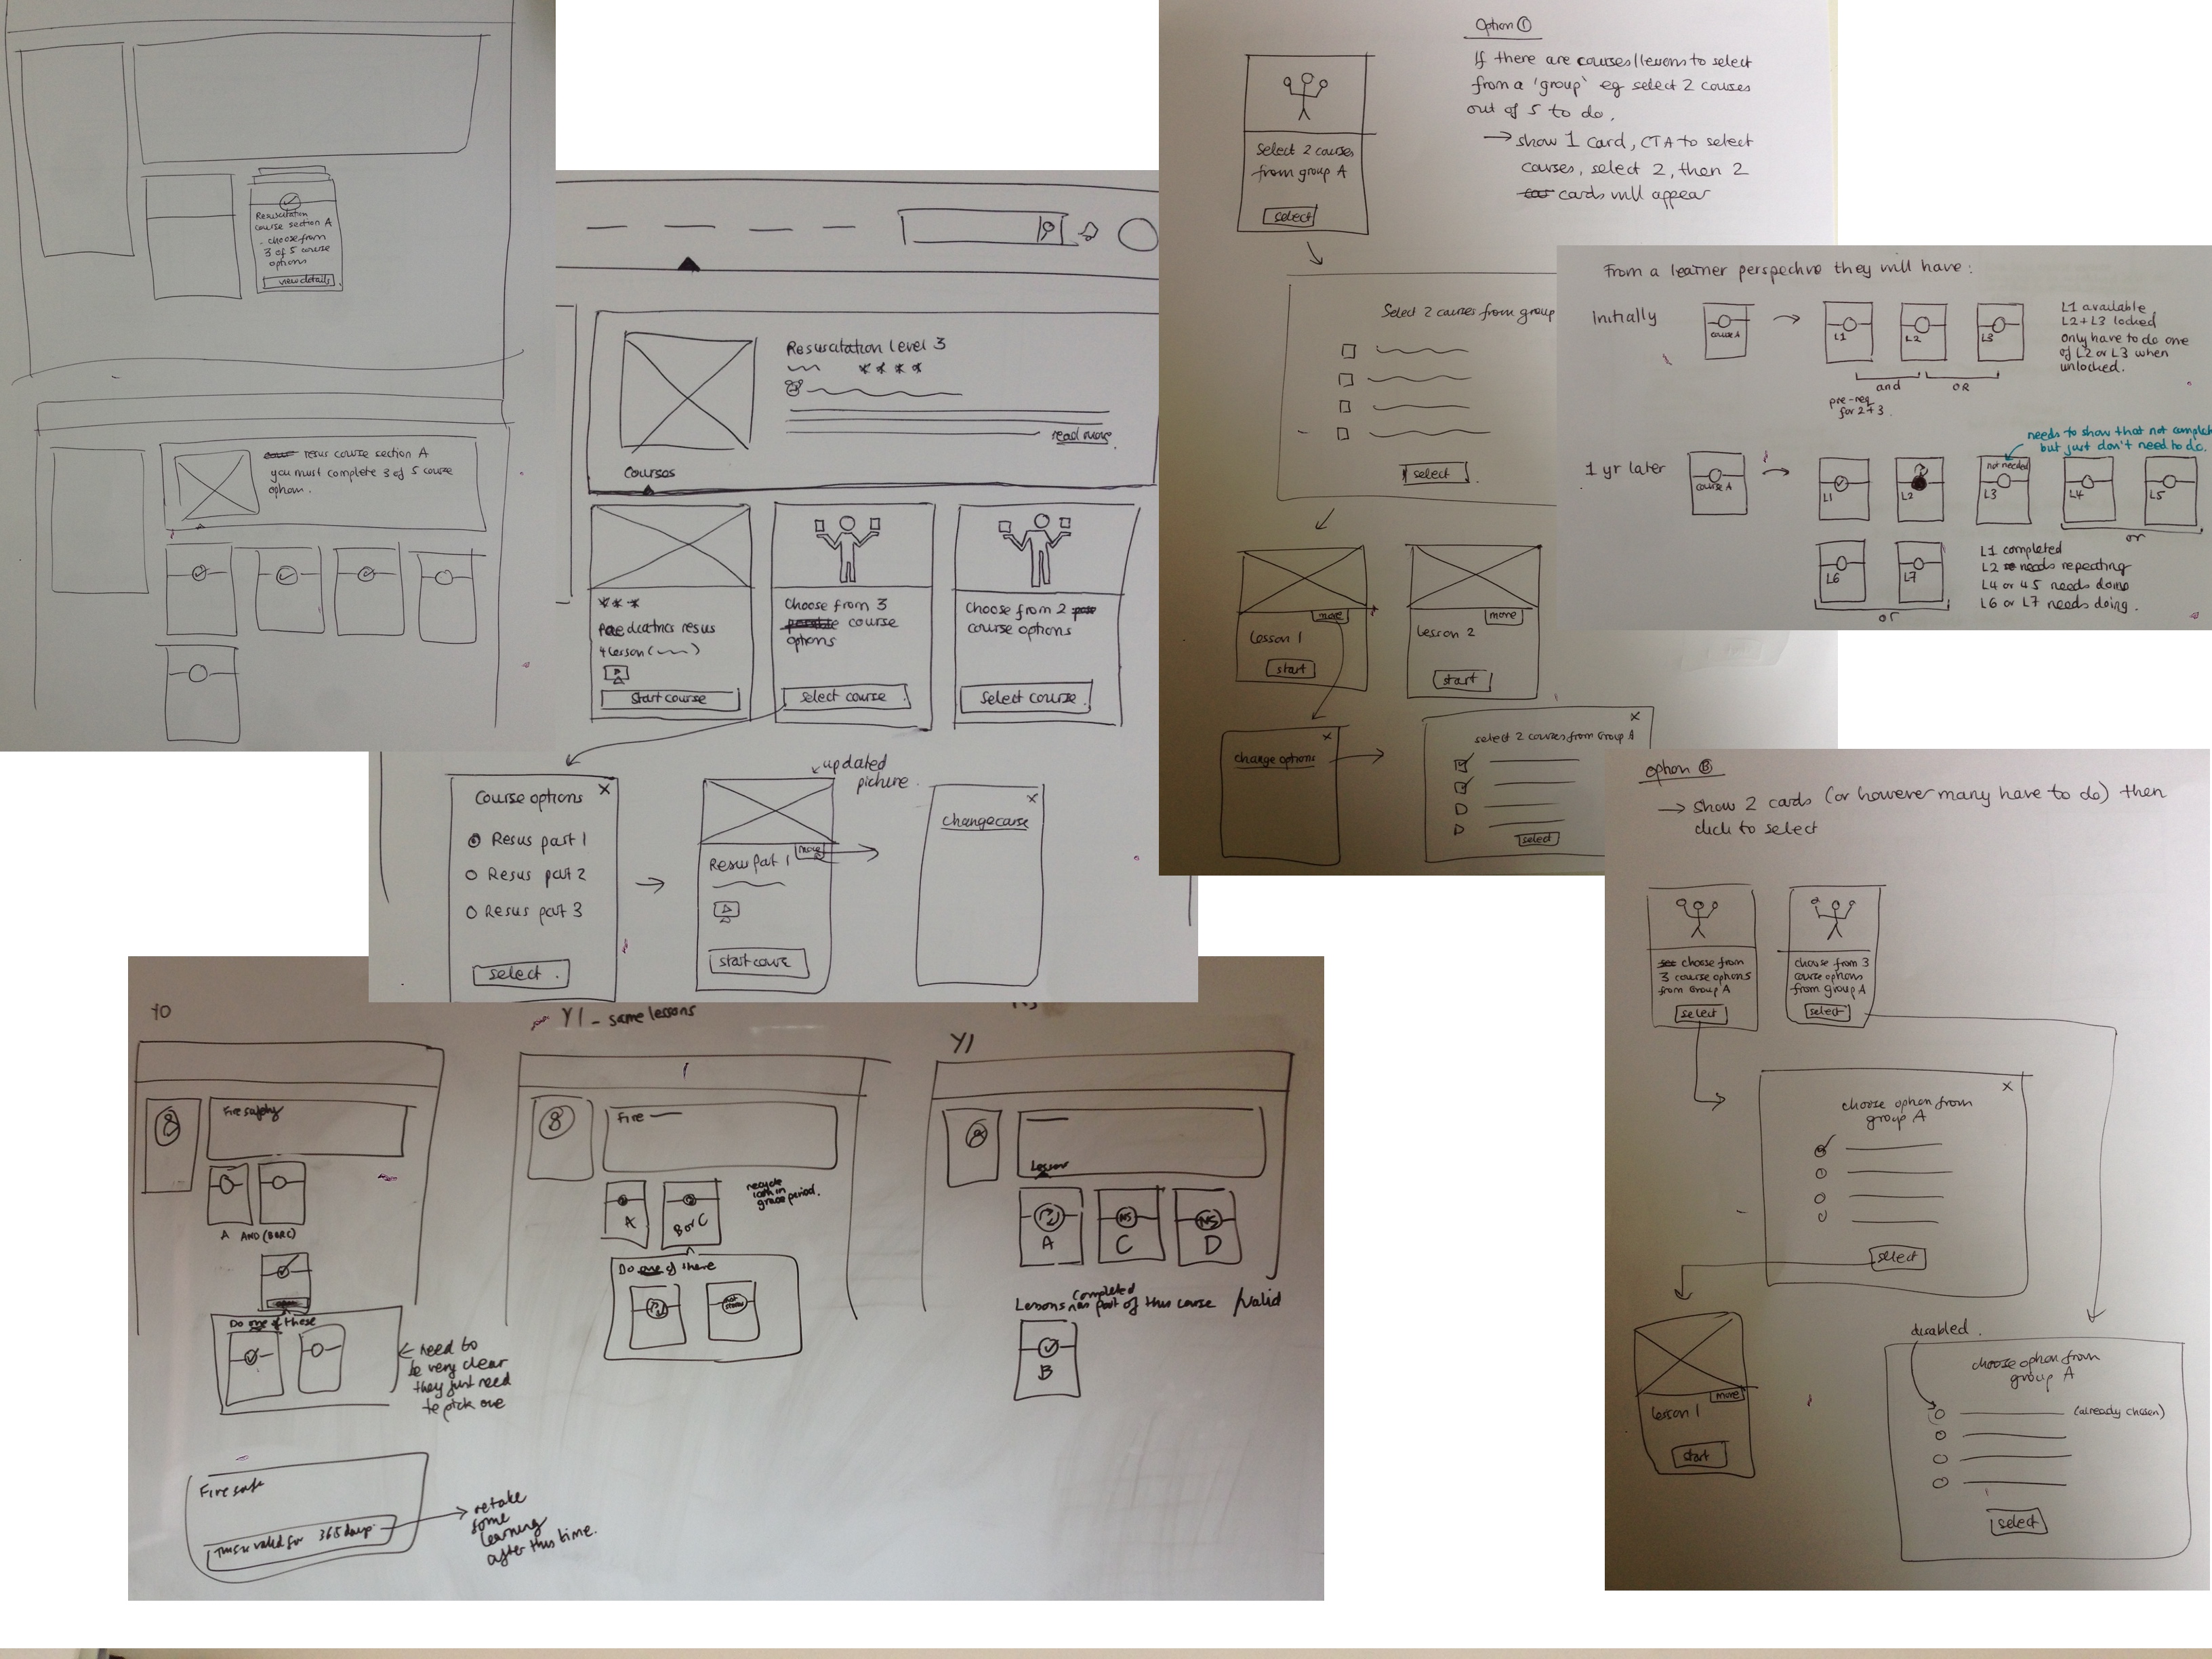 Sketches of initial concepts for employee screens